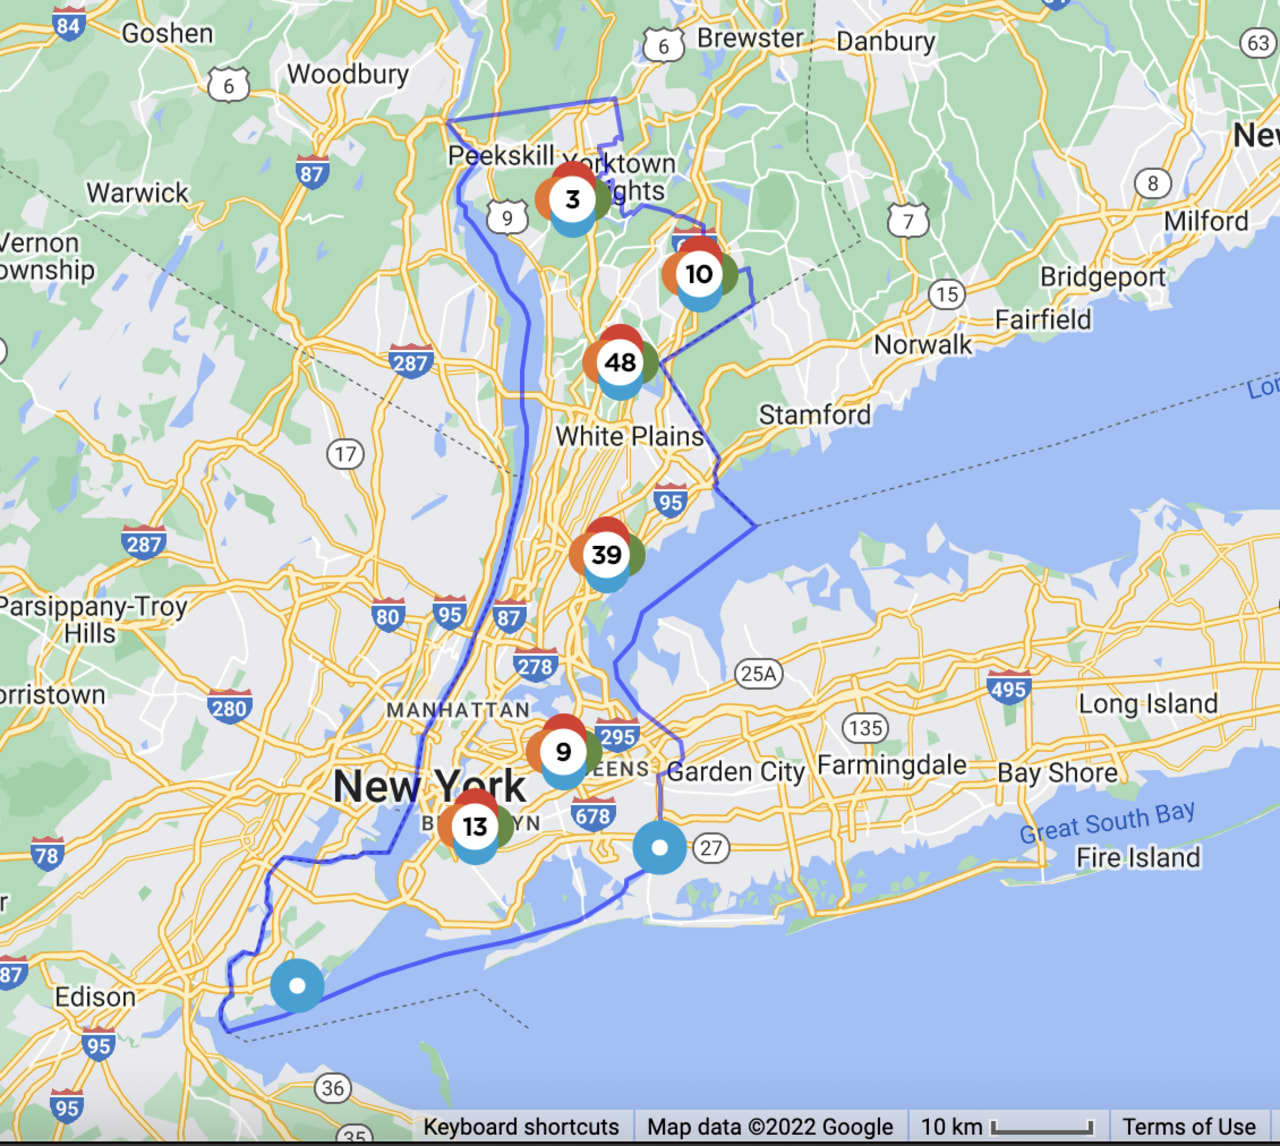 The Con Edison outage map of Westchester County as of around 4:15 p.m. on Wednesday, Nov. 30.